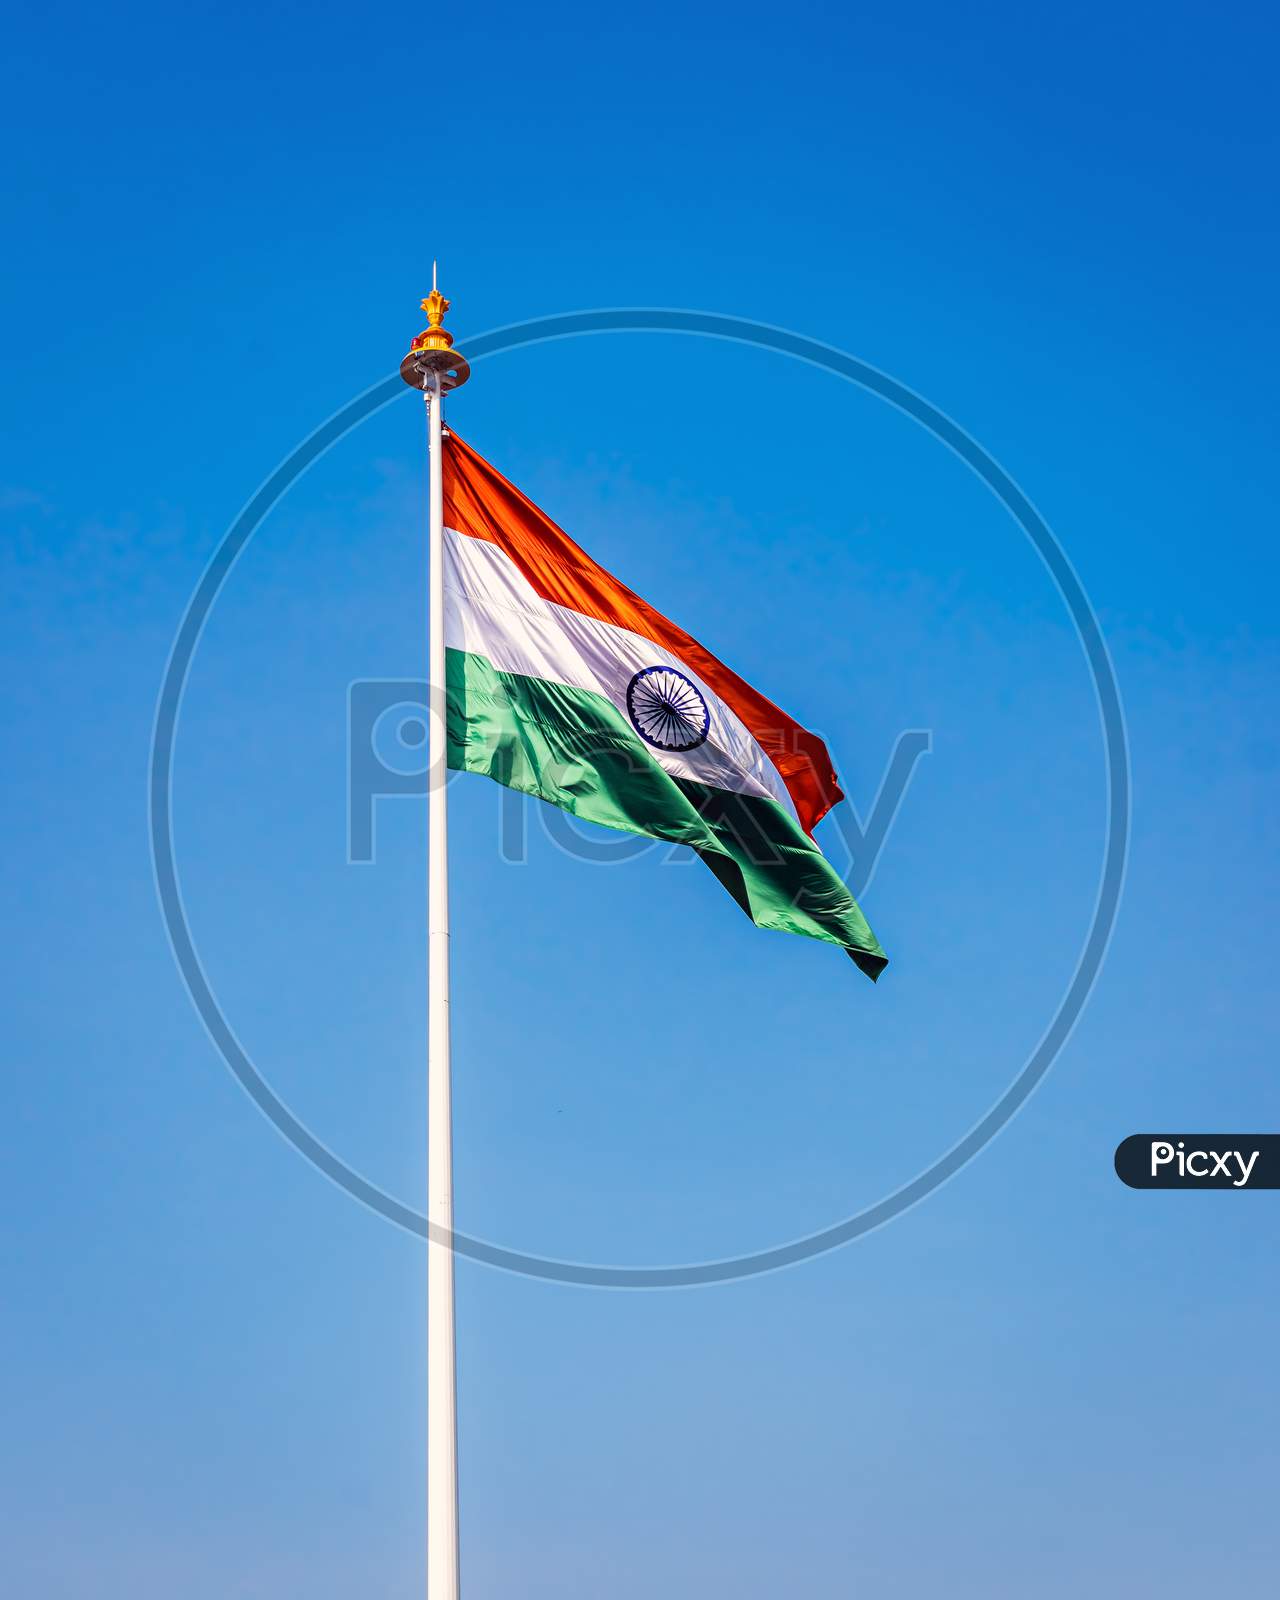 Indian National Flag , Flying High In The Sky On A Clear Blue Background.